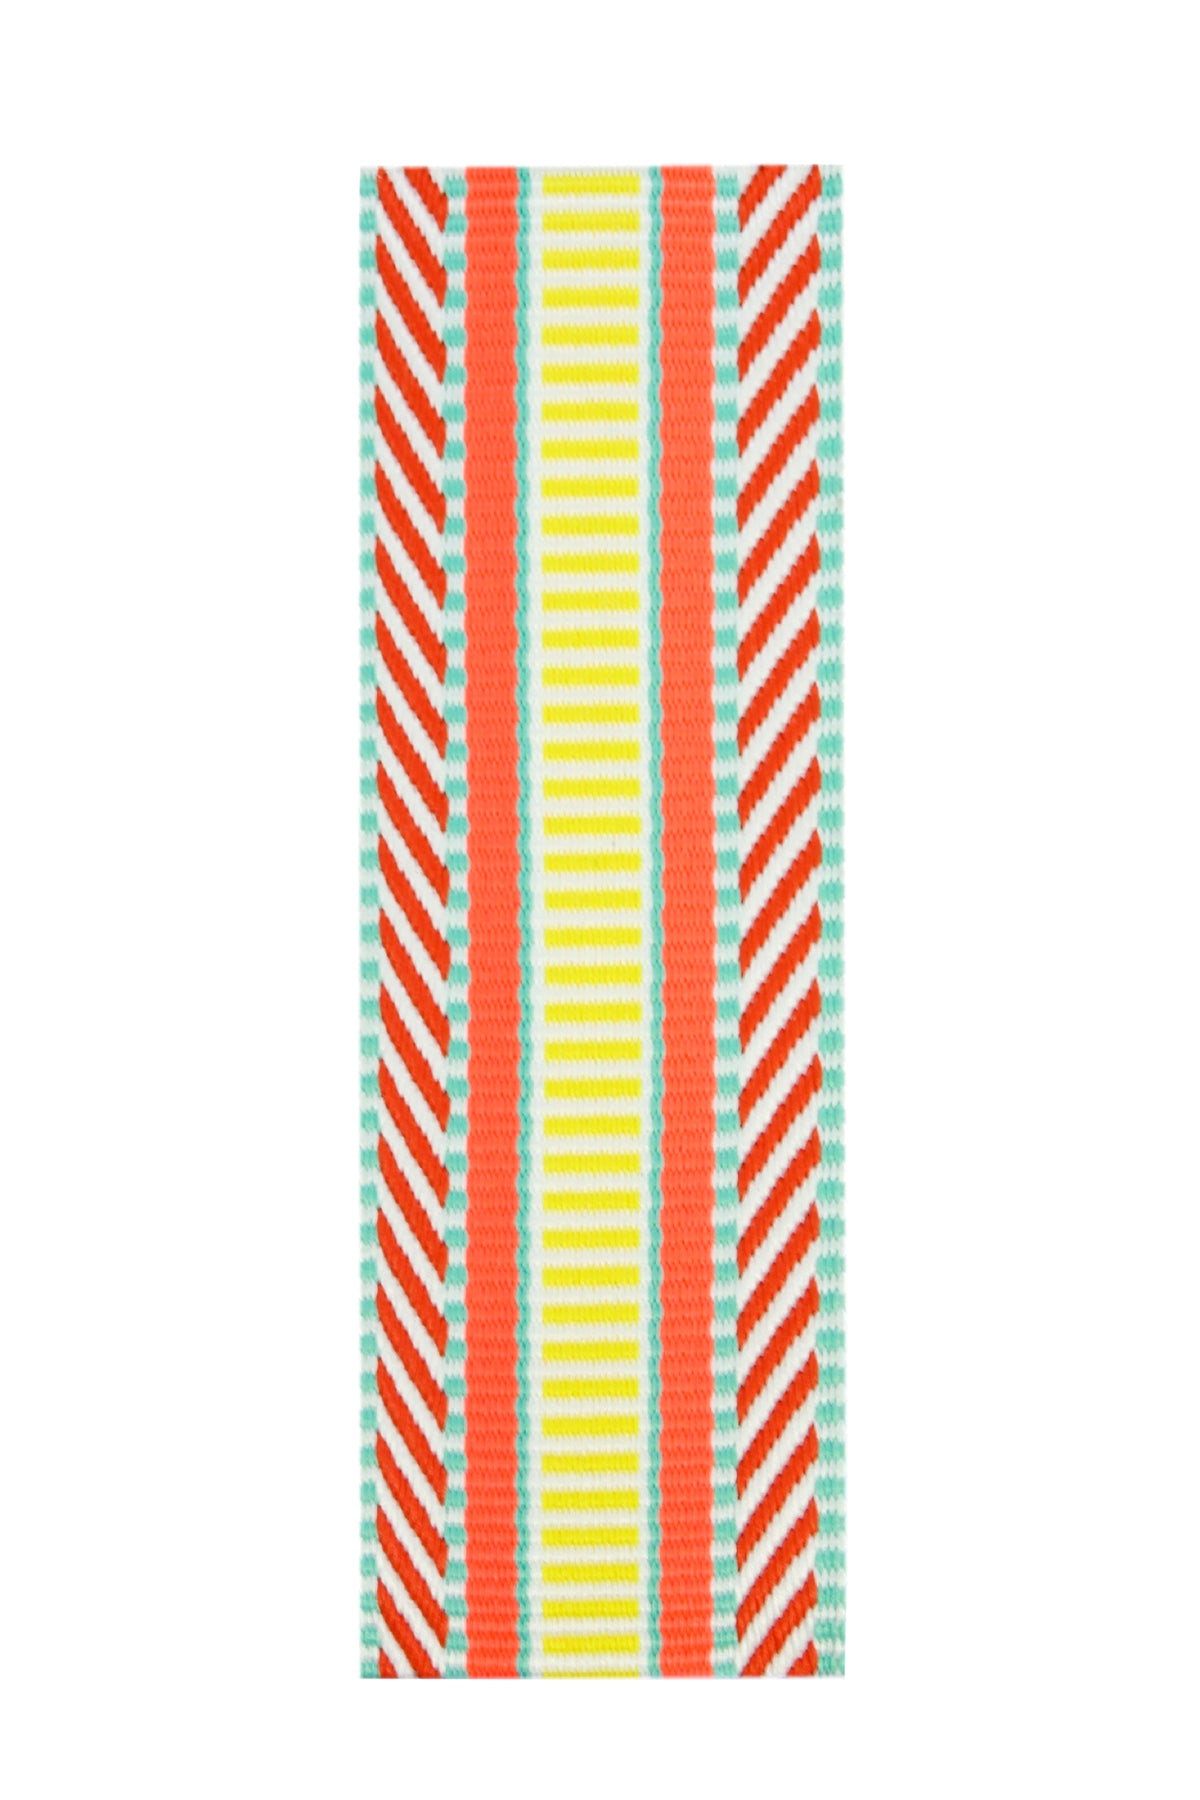 Bag Strap Red/Yellow